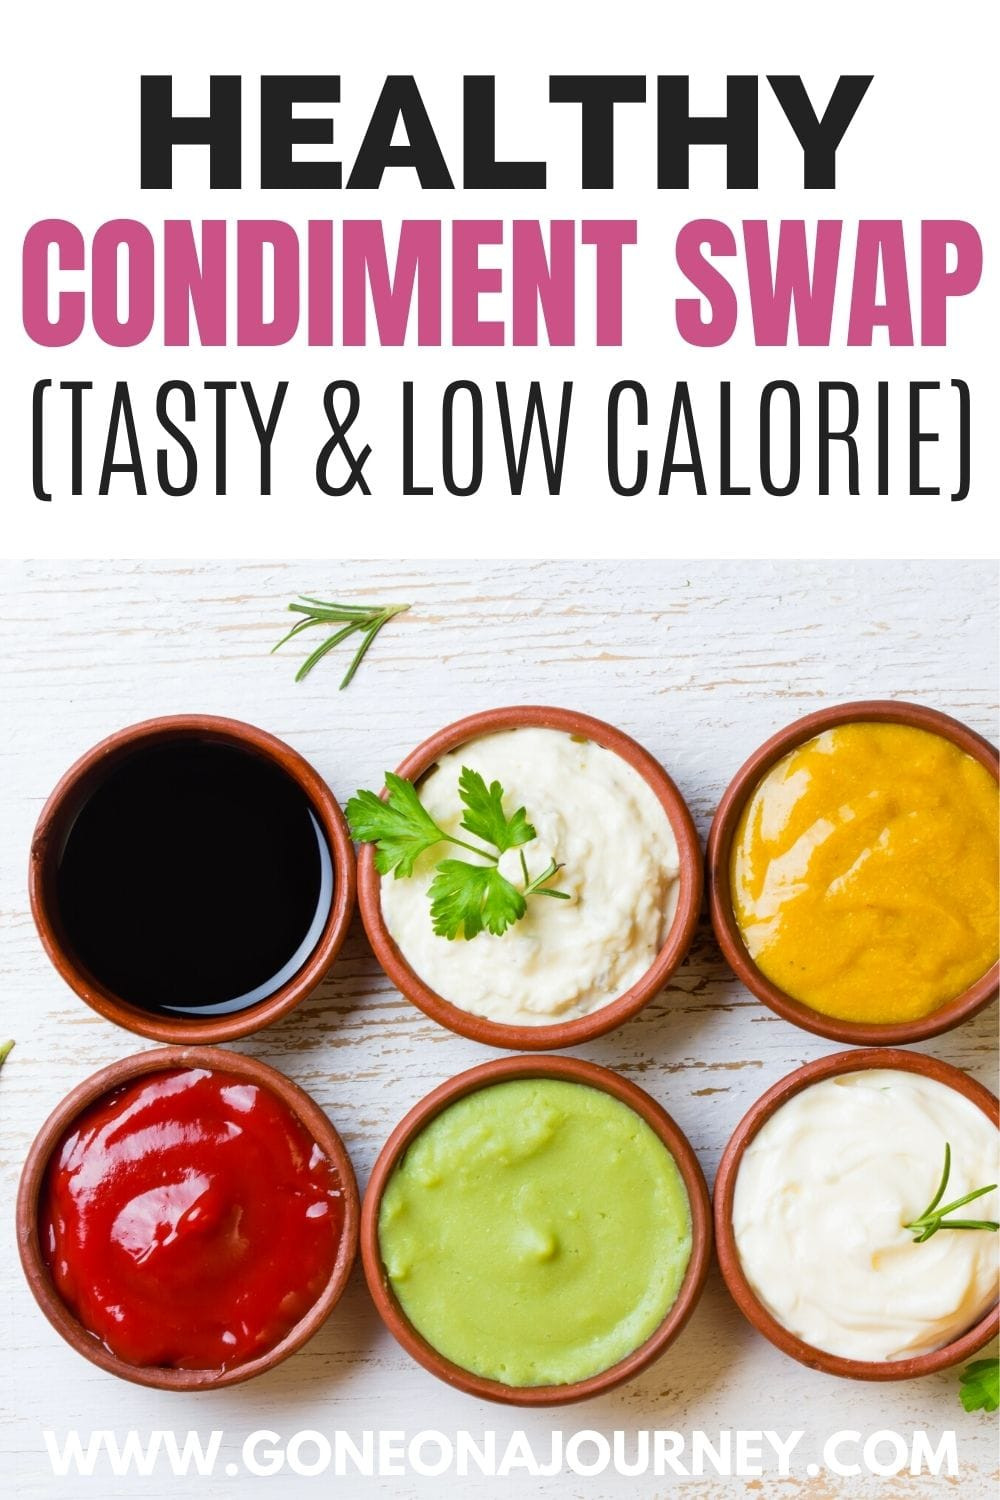 The Most Shared Low Calorie Sauces
 Of All Time